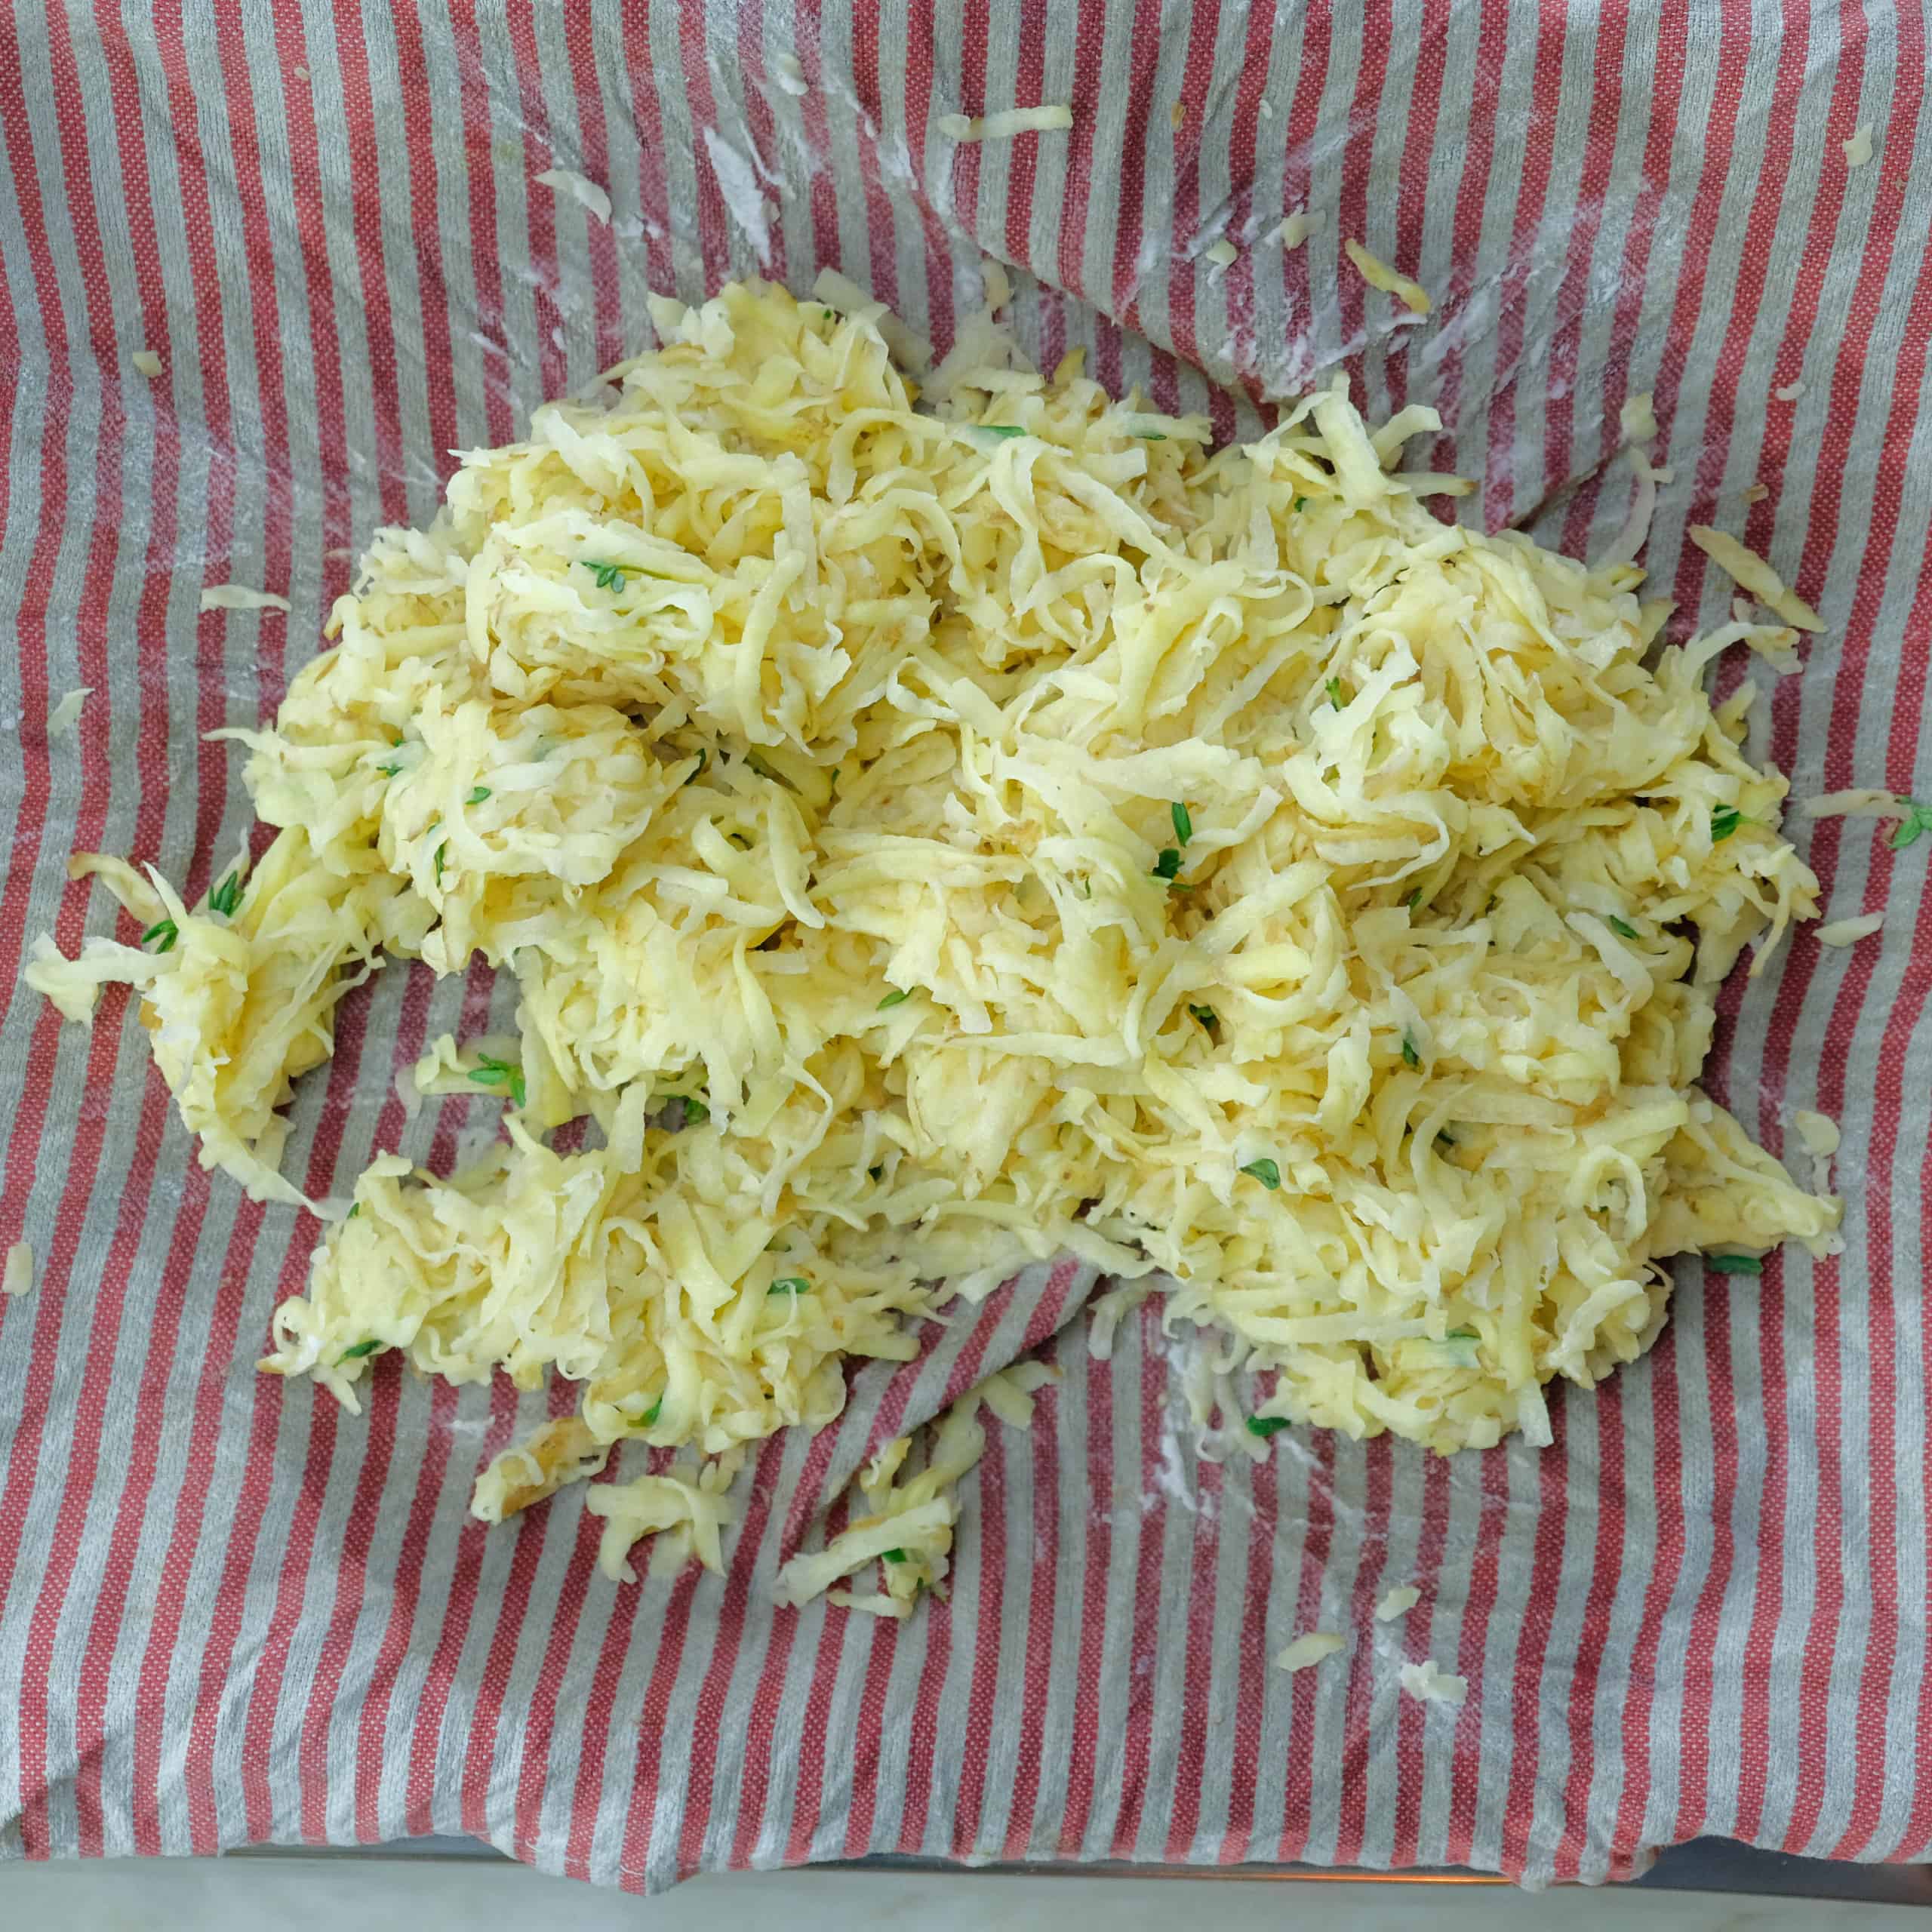 SHREDDED POTATOES, PRESSED, SEASONED WITH THYME FOR ROSTI